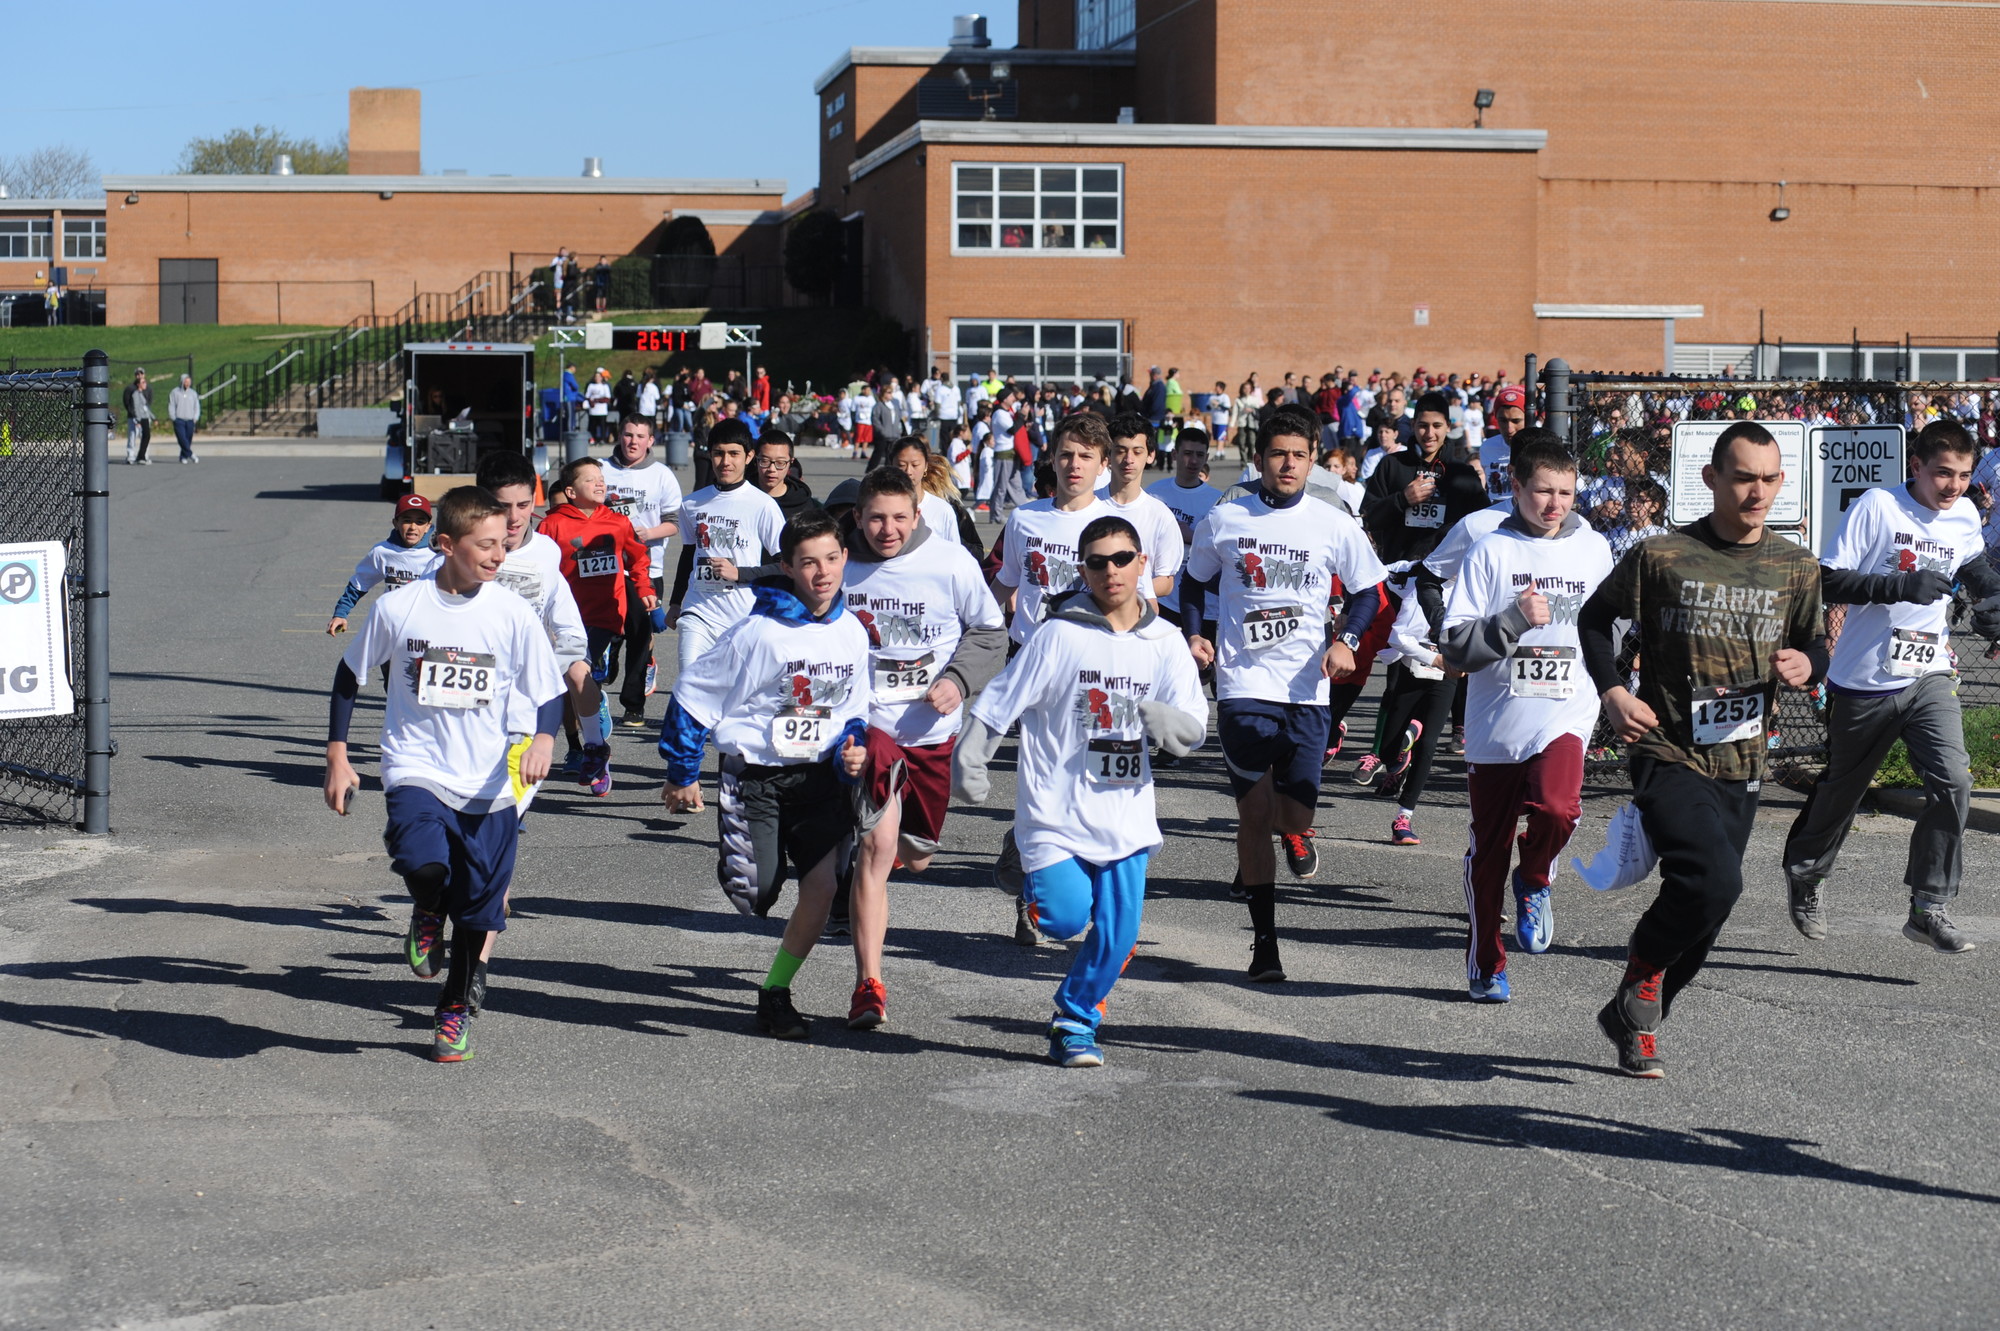 The seventh annual Run With the Rams 5K, which kicked off at W.T. Clarke High School at 9 a.m. last Saturday, drew hundreds of community members. The event’s proceeds are divided between the school’s athletic programs and local families that have fallen upon difficult times.